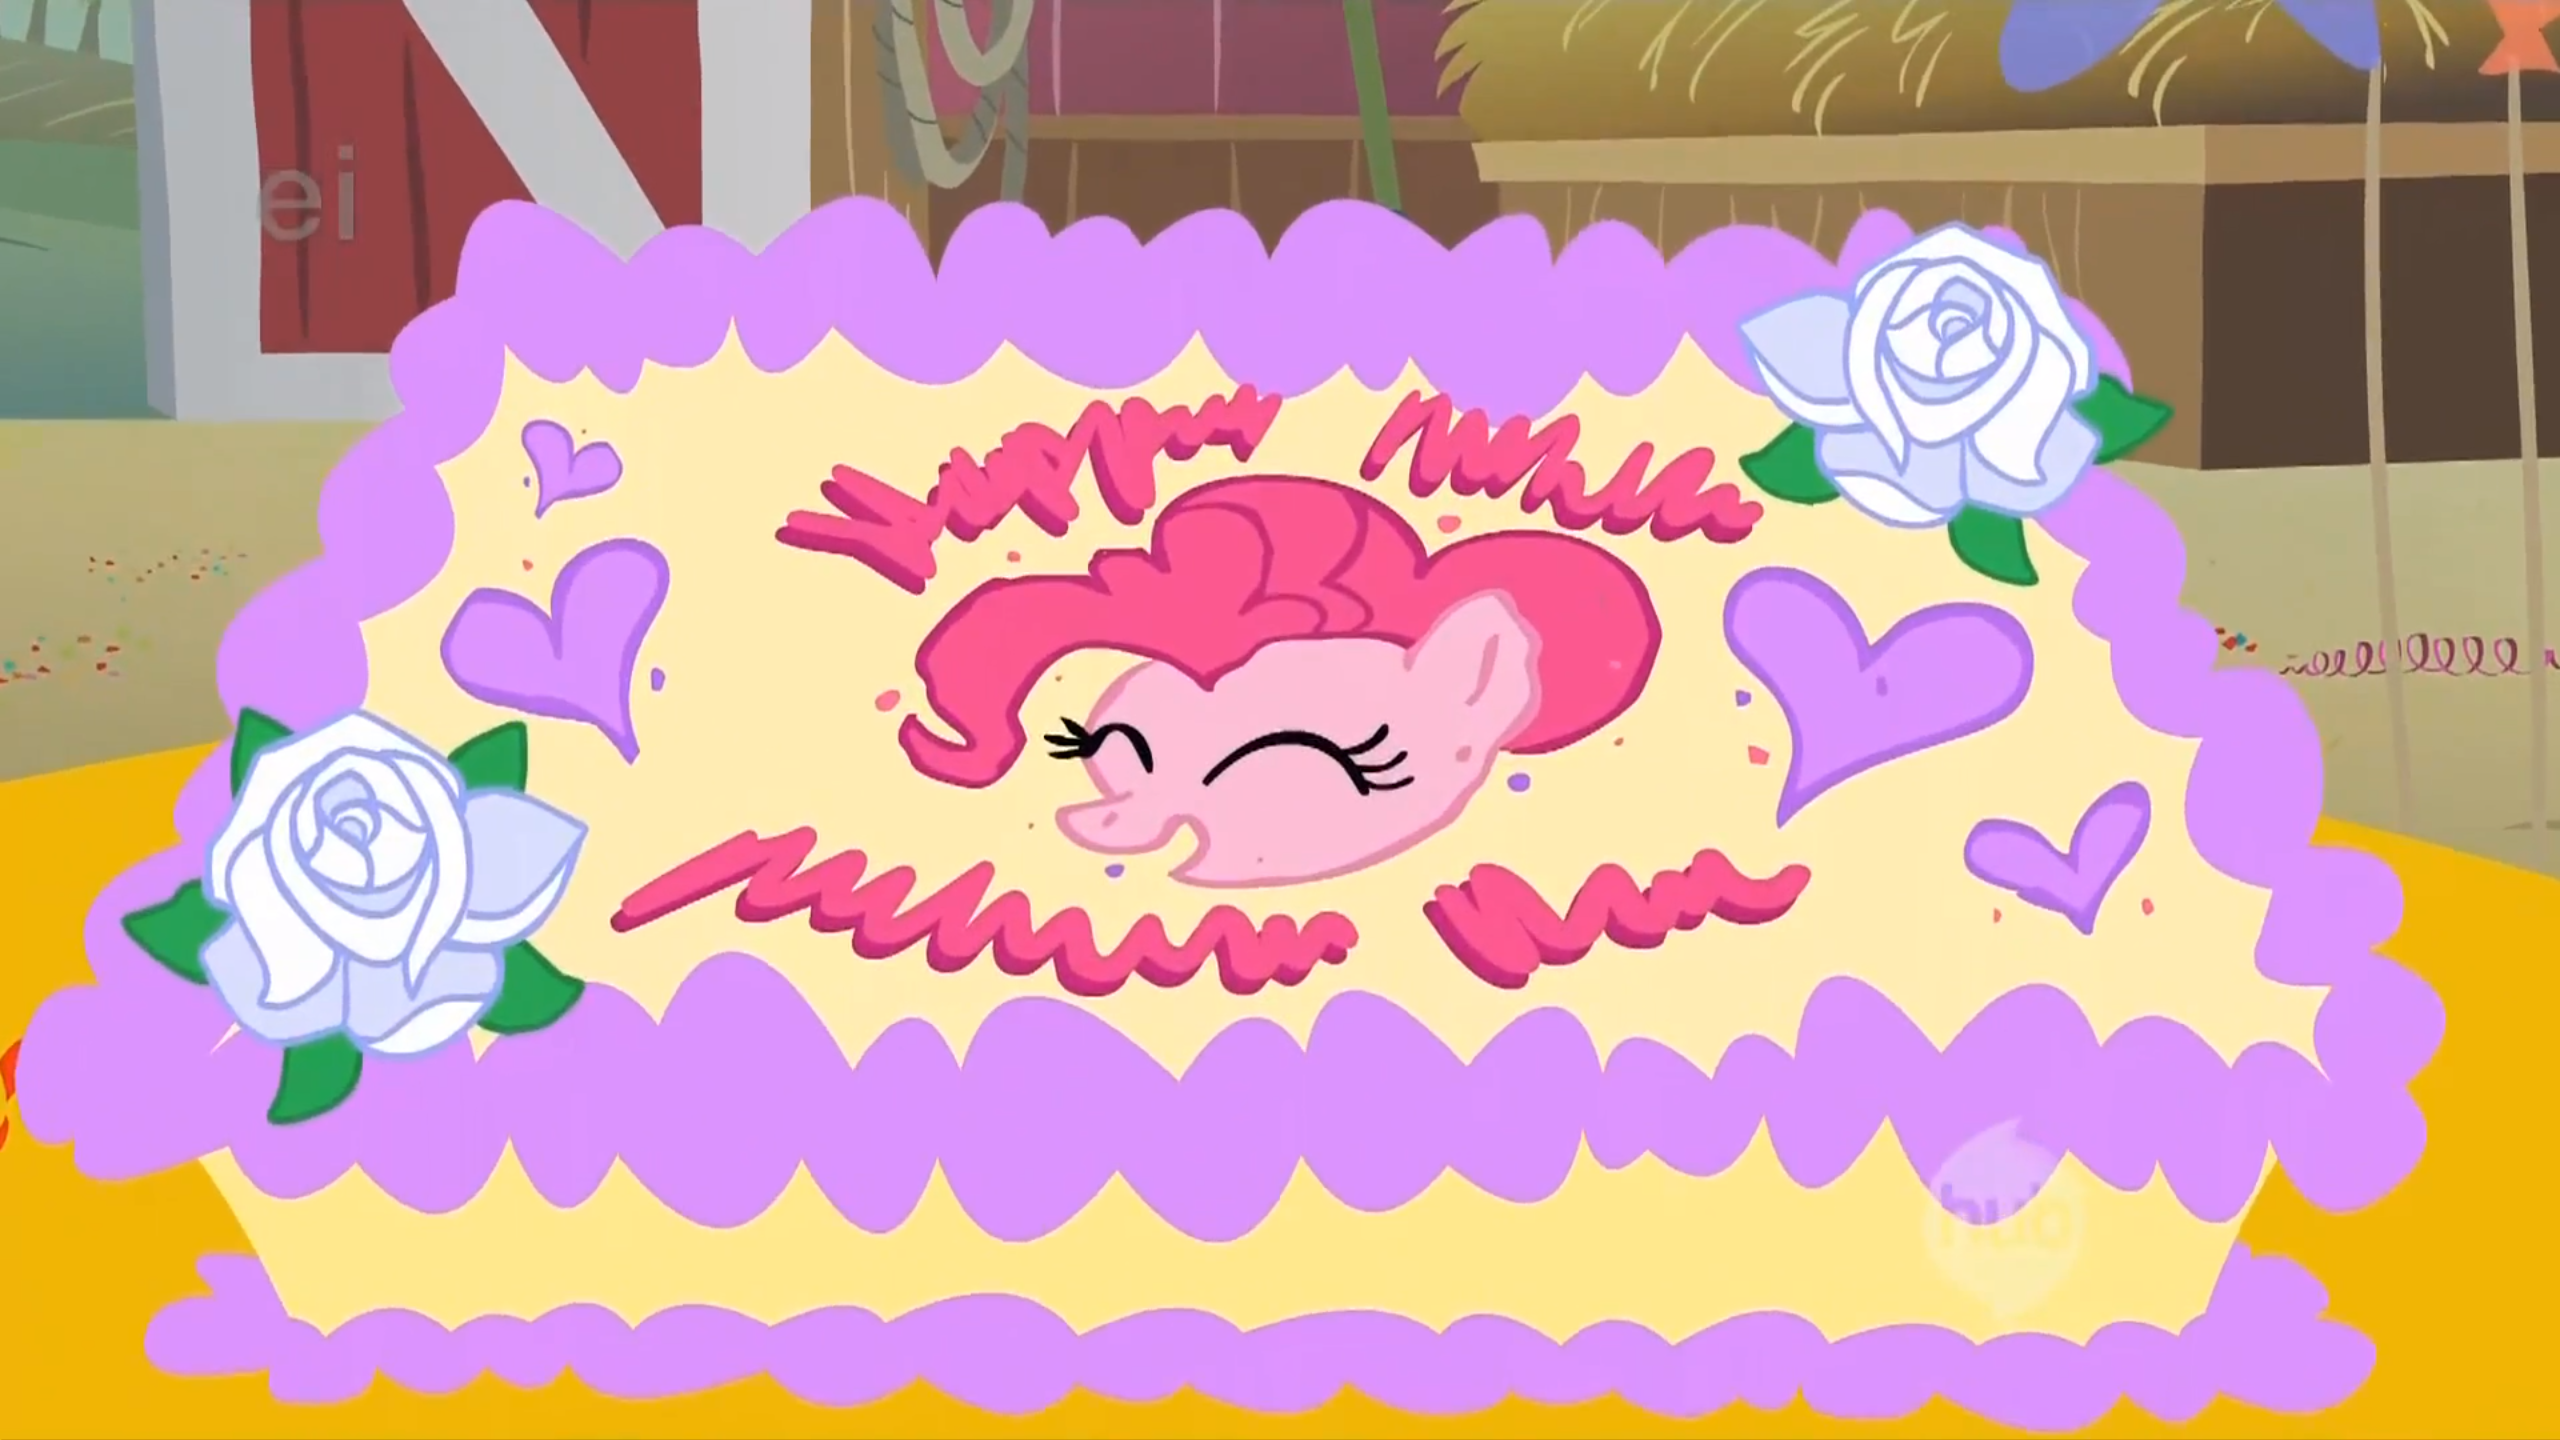 A large, rectangular cake, decorated with two white roses, a purple border, several purple hearts and a portrait of Pinkie Pie's face.